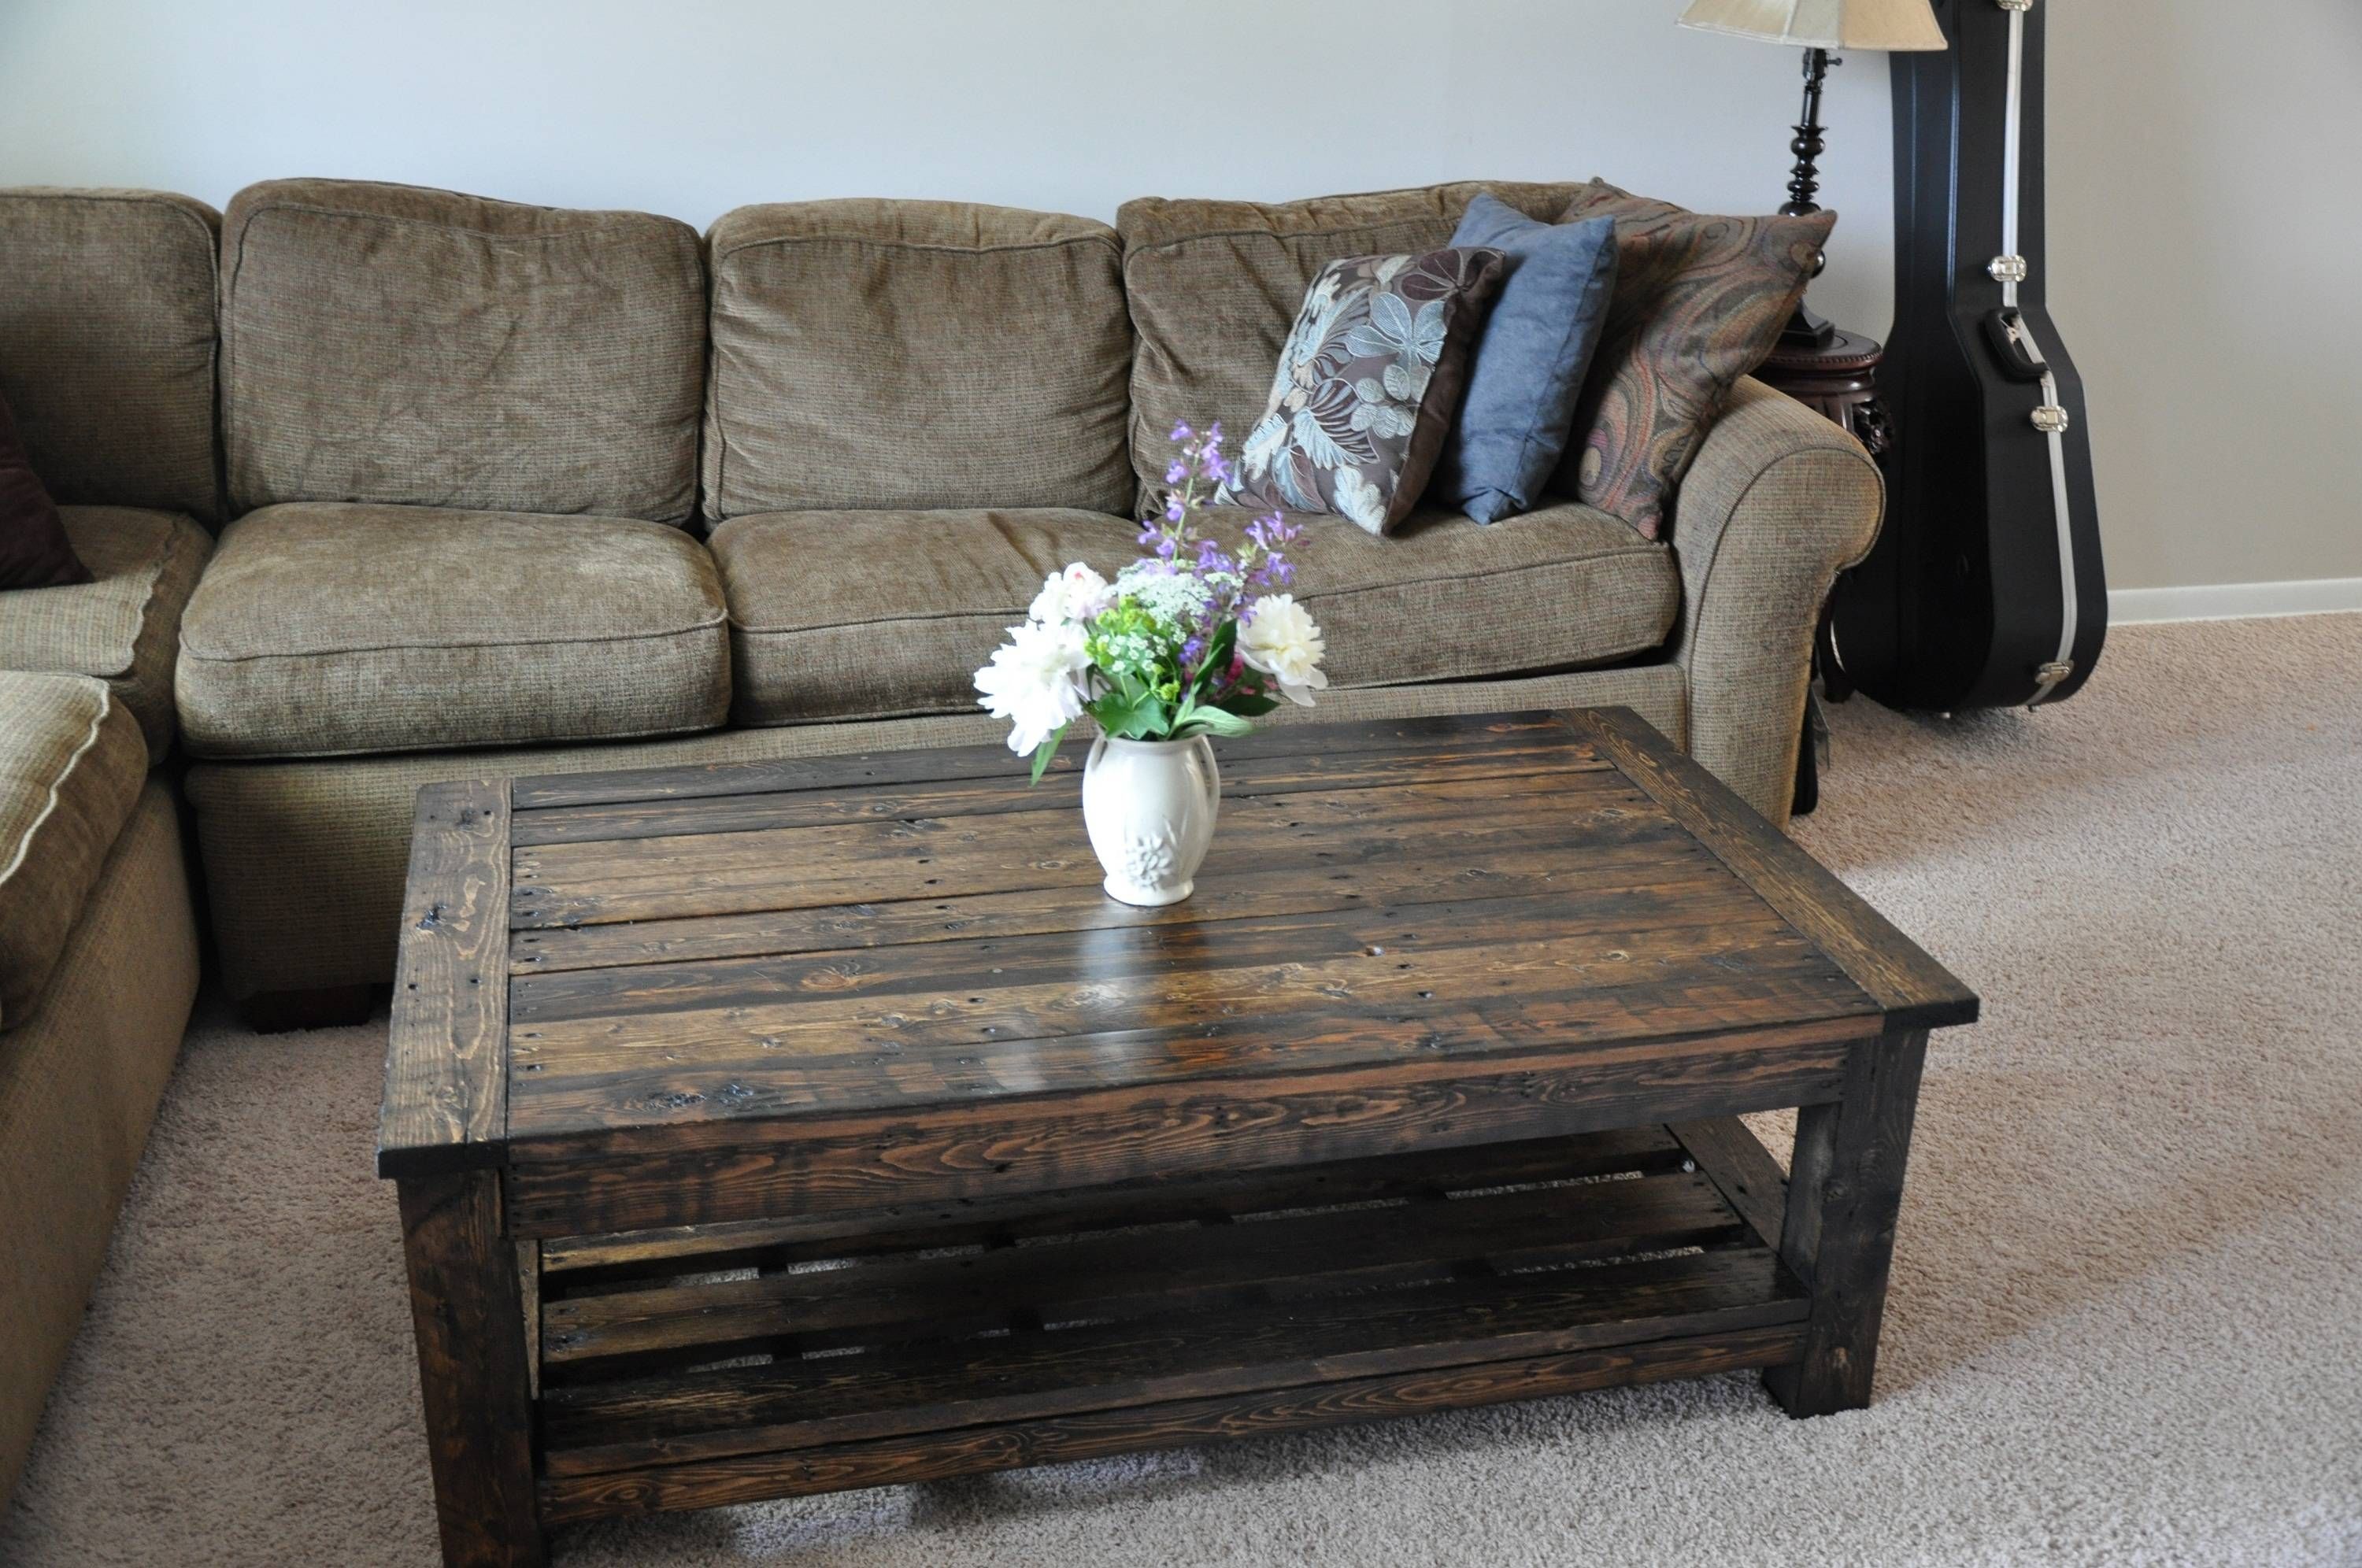 18 Diy Pallet Coffee Tables | Guide Patterns With Regard To Rustic Wood Diy Coffee Tables (View 1 of 30)